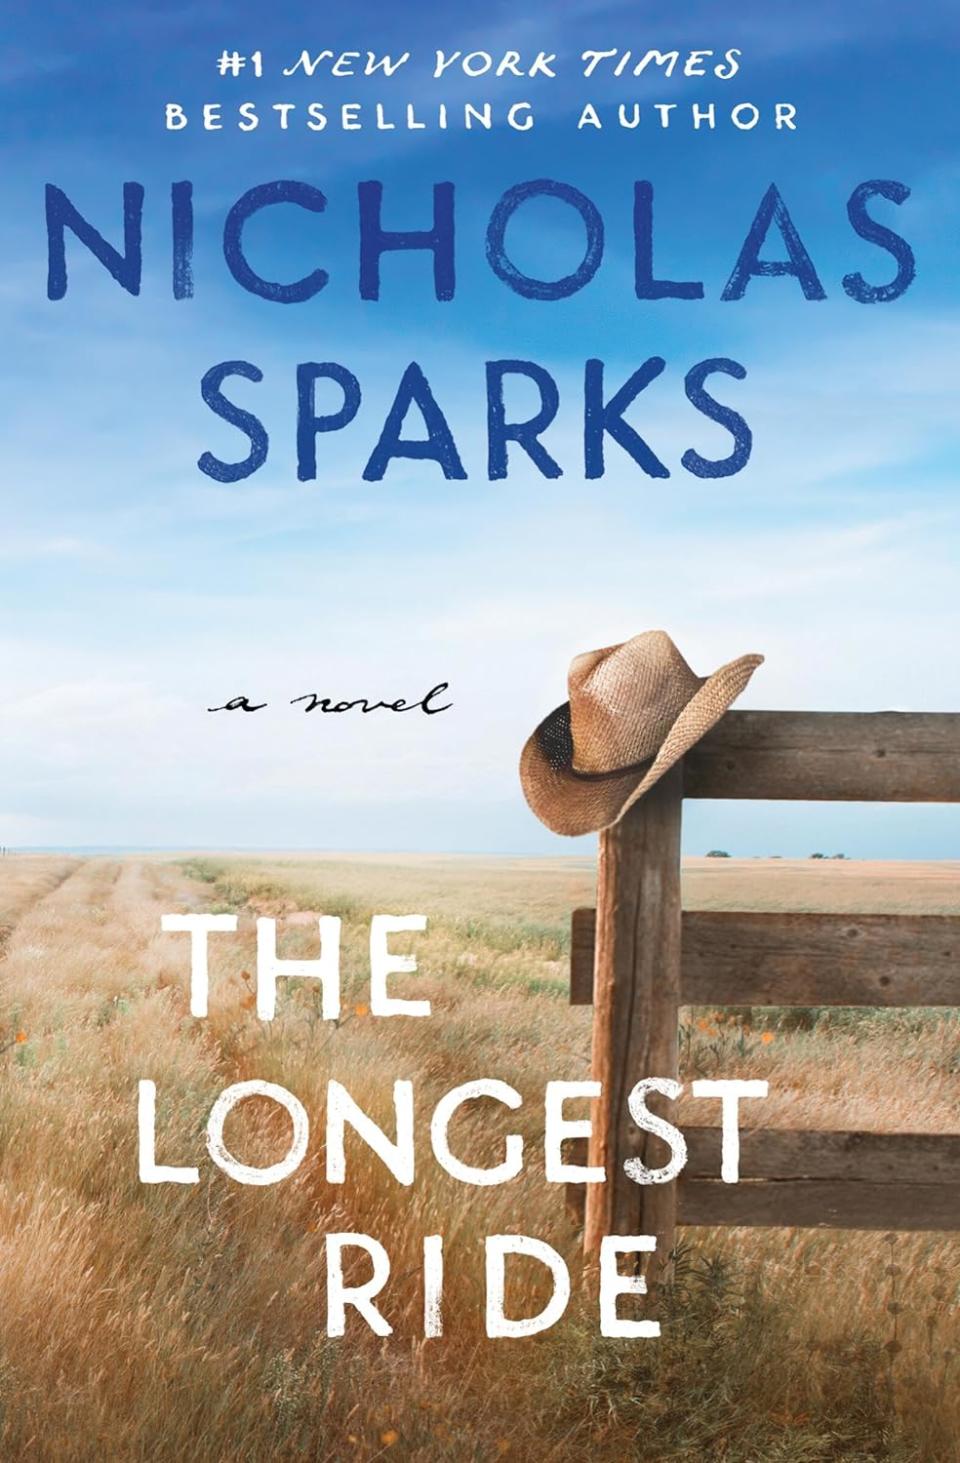 The Longest Ride by Nicholas Sparks (books that are movies and shows)